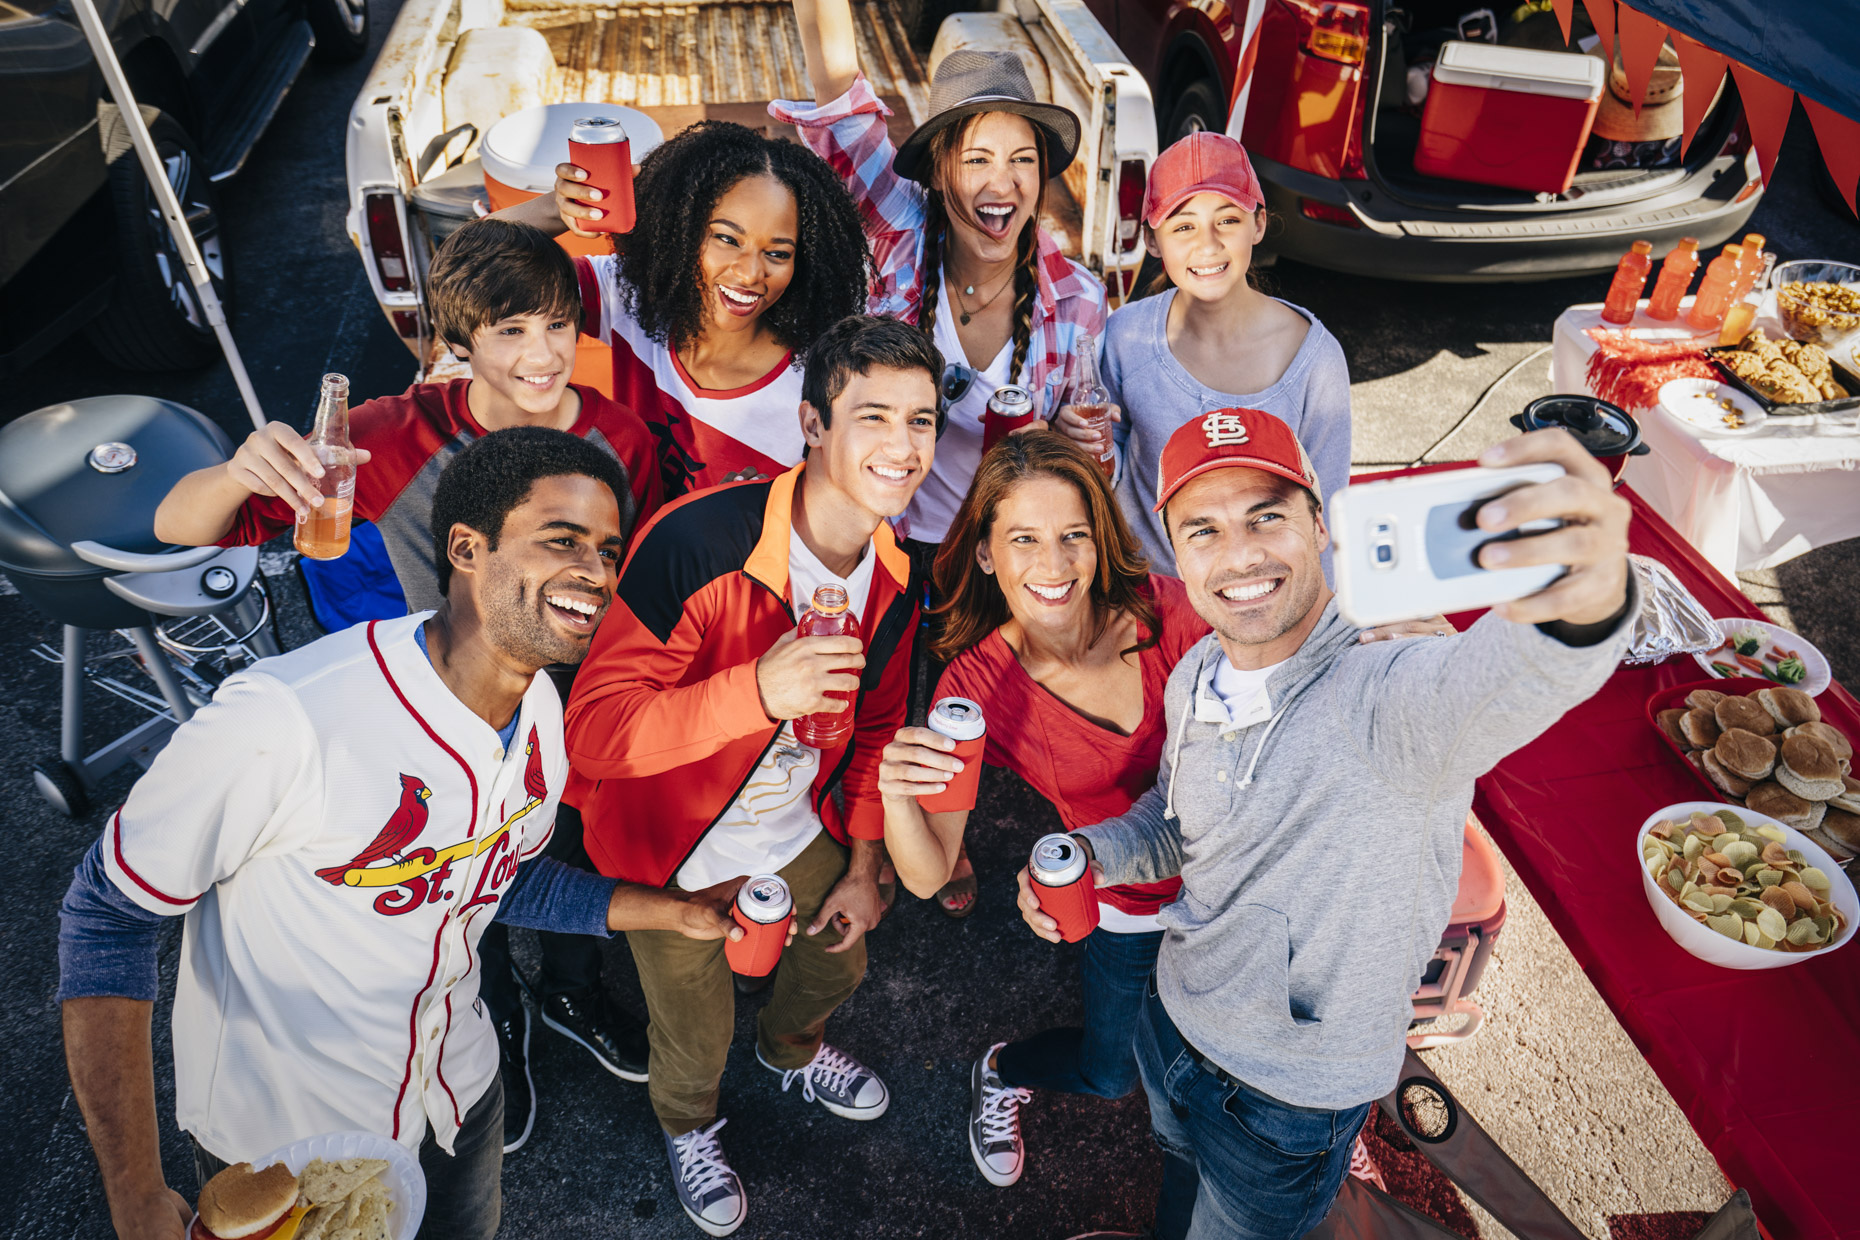 Man taking selfie photo with phone of tailgating group of sports fans